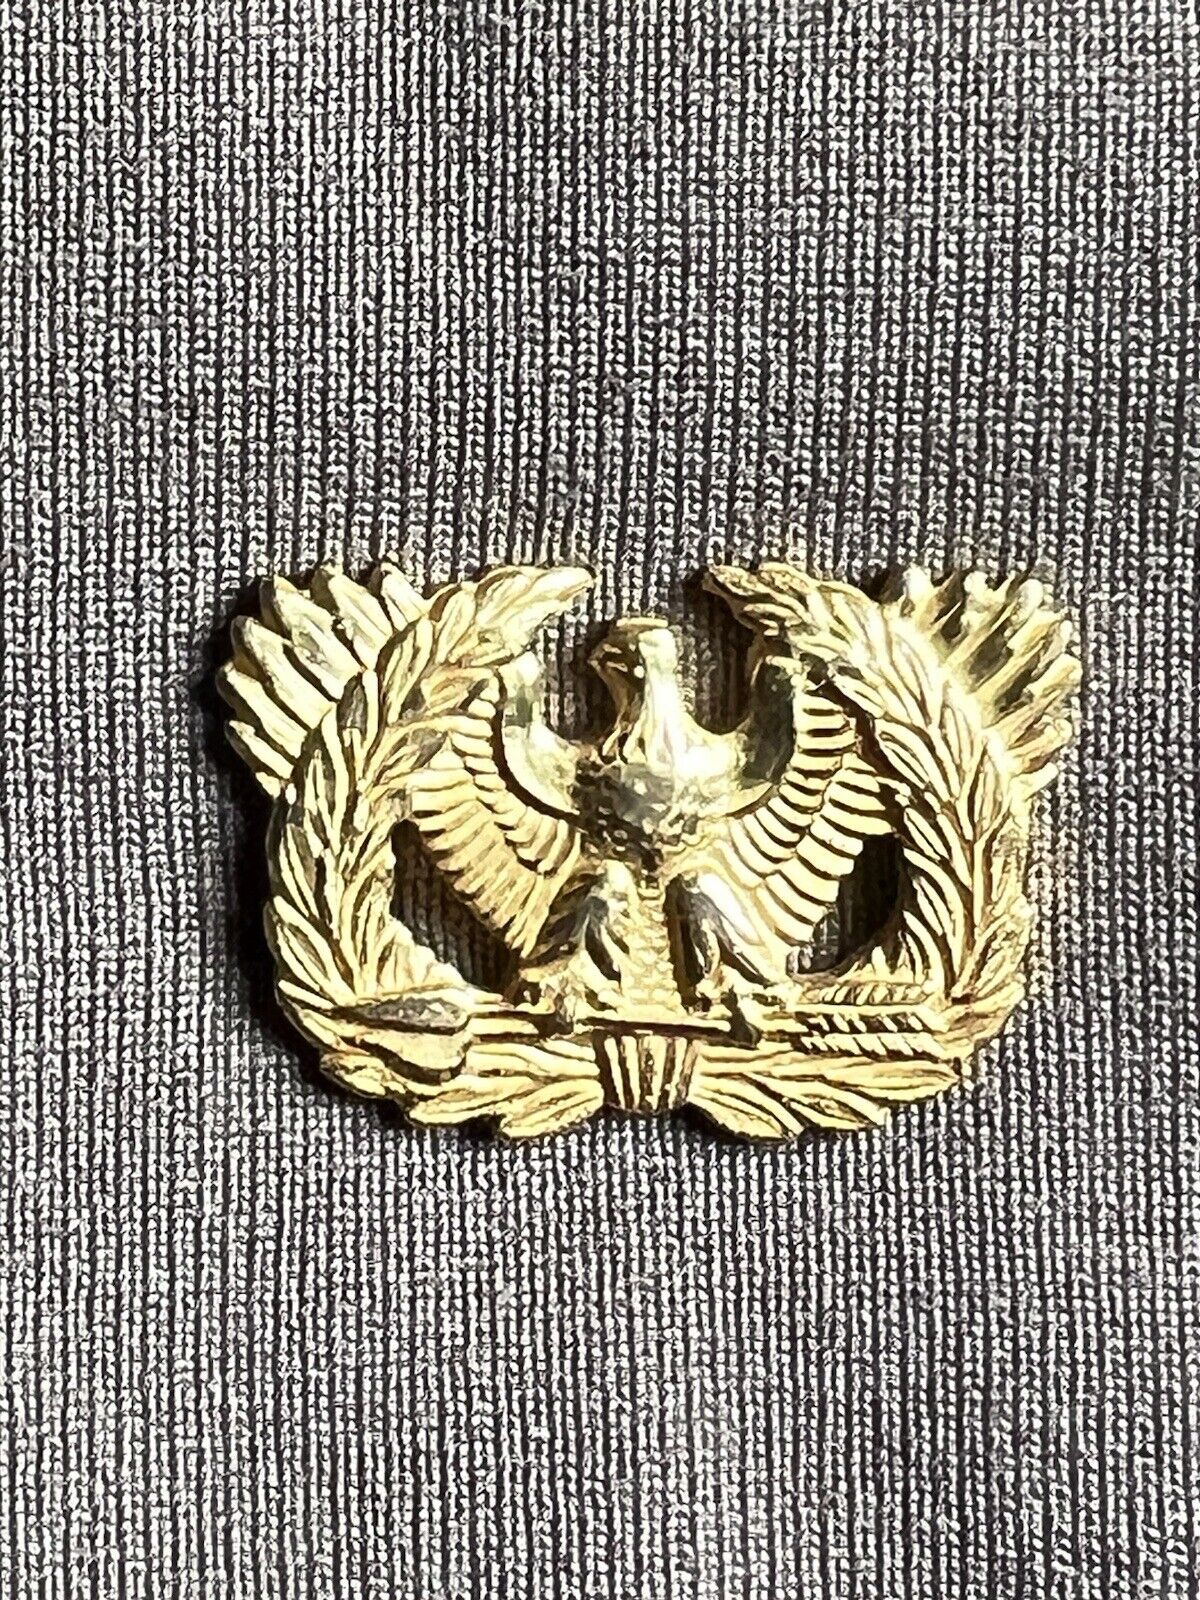 VINTAGE WWII US ARMY WARRANT OFFICER EAGLE RISING PIN